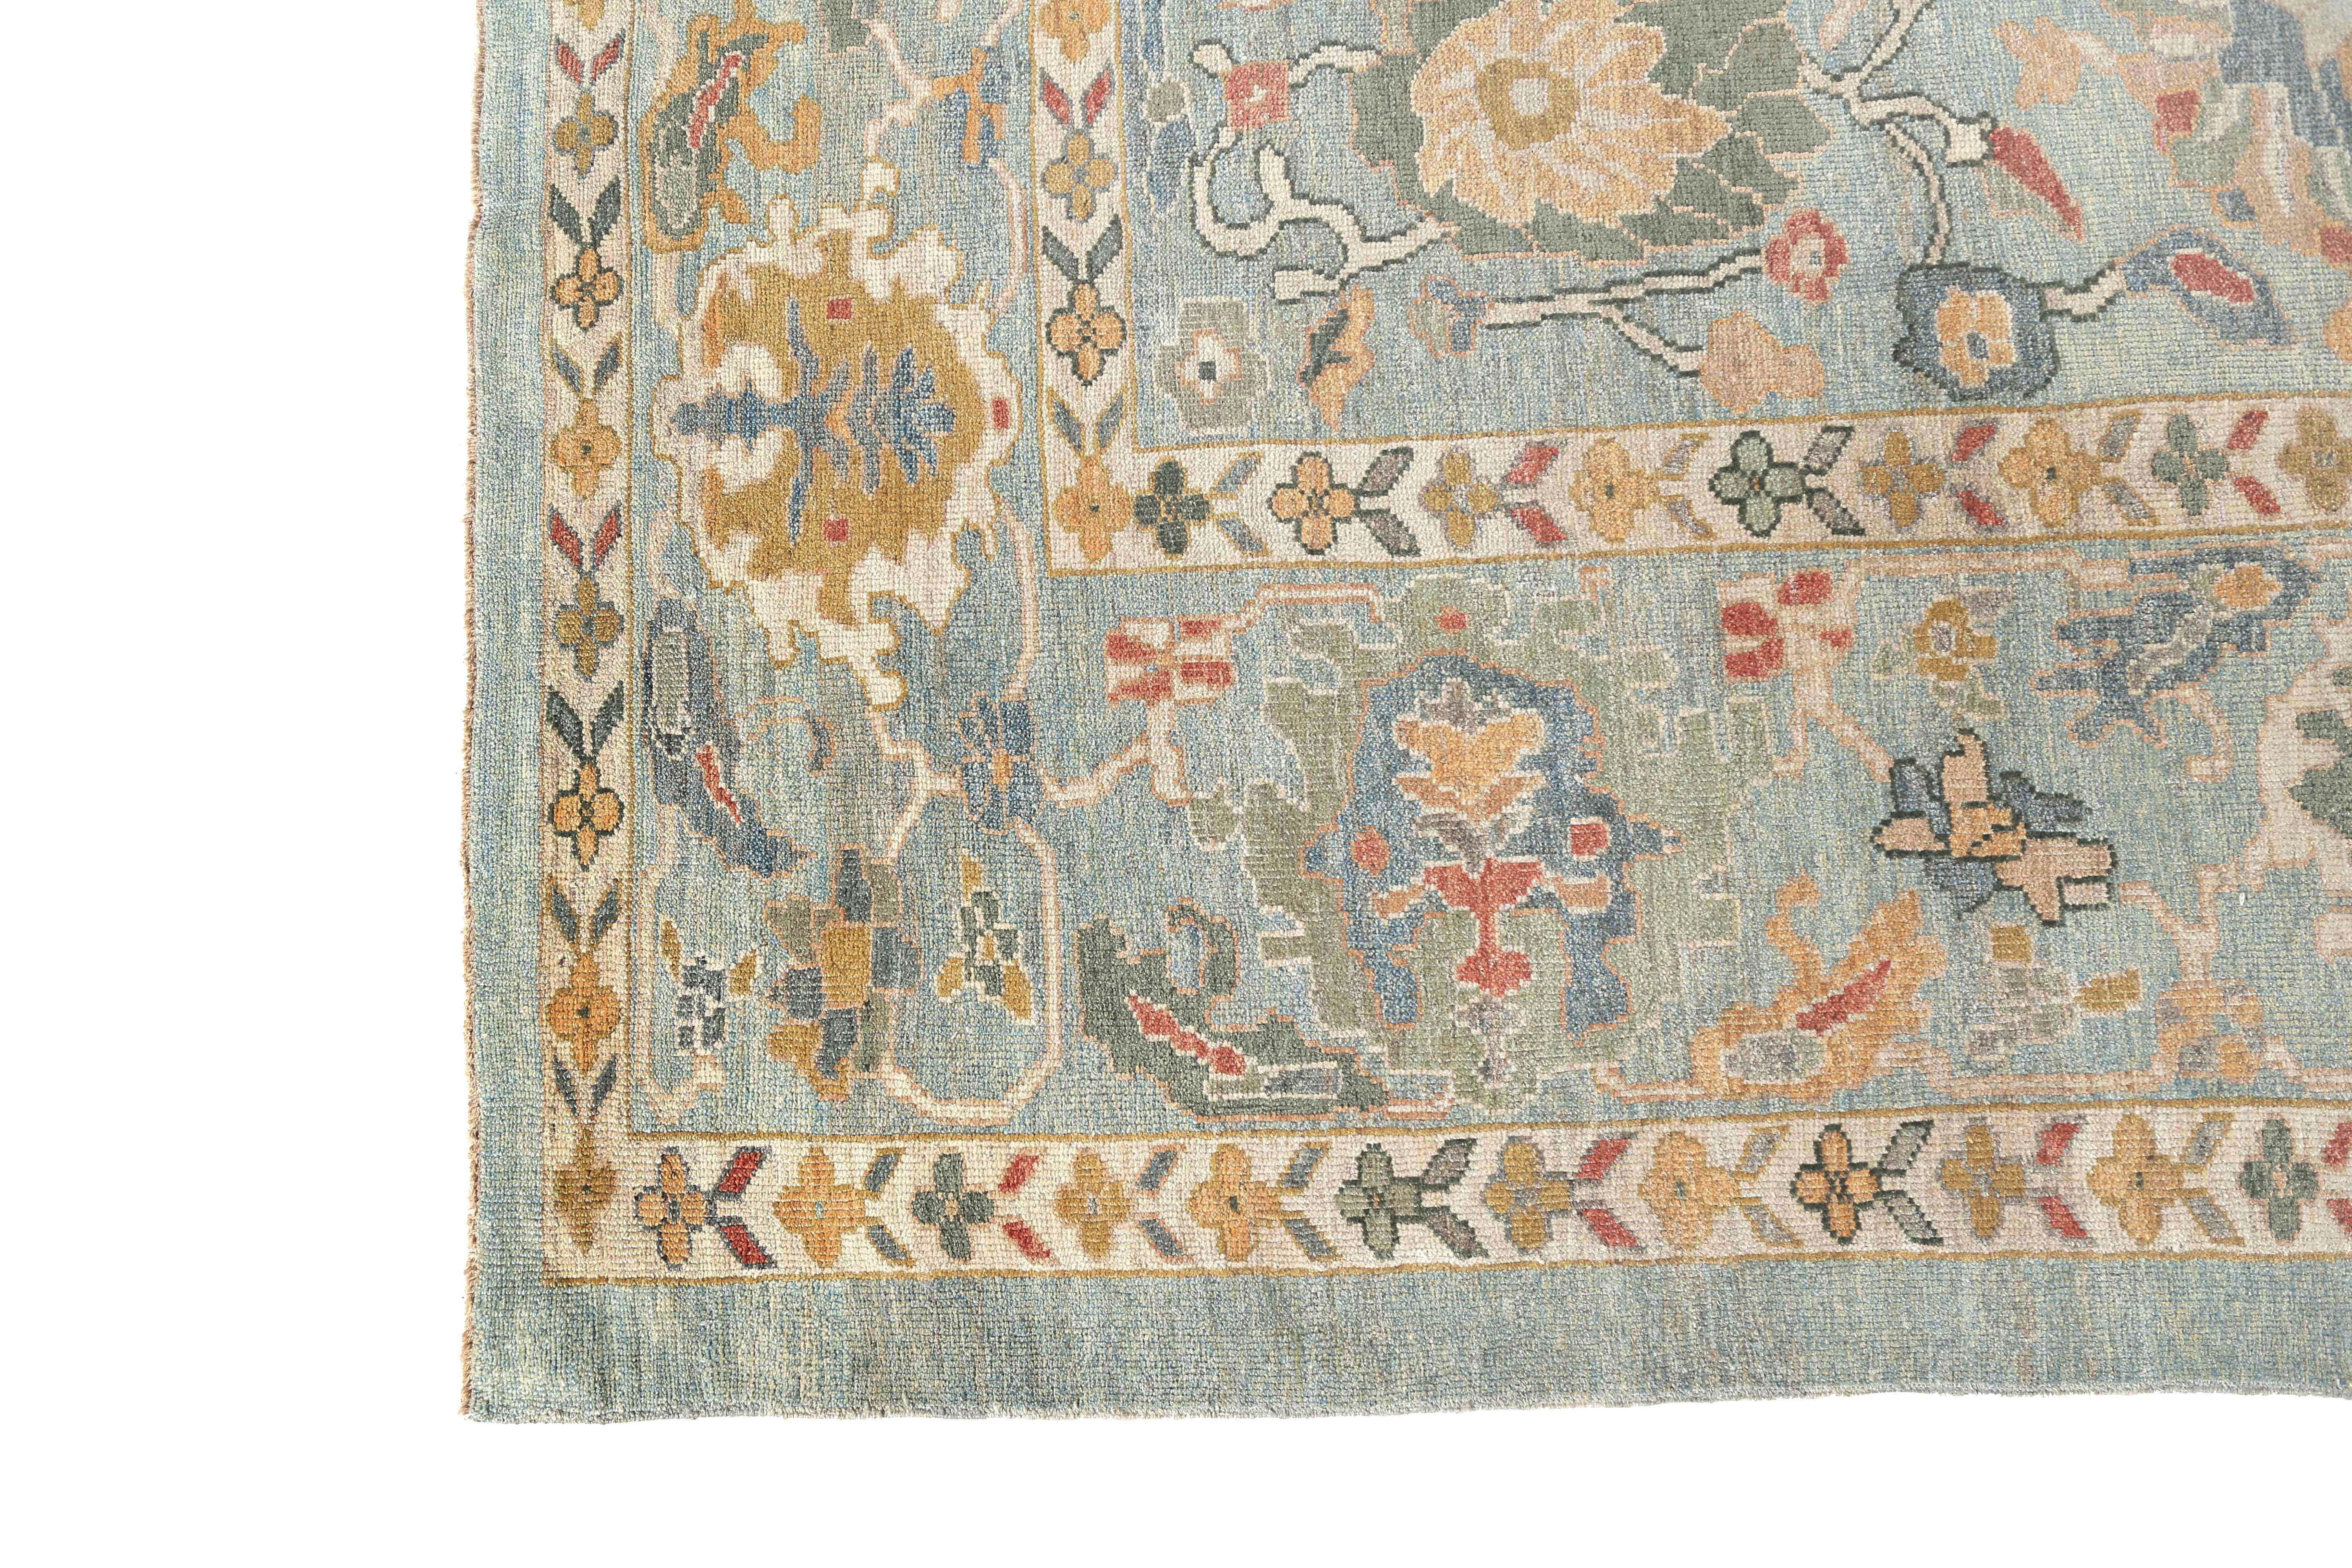 Introducing our exquisite handmade Sultanabad rug, measuring 10'0